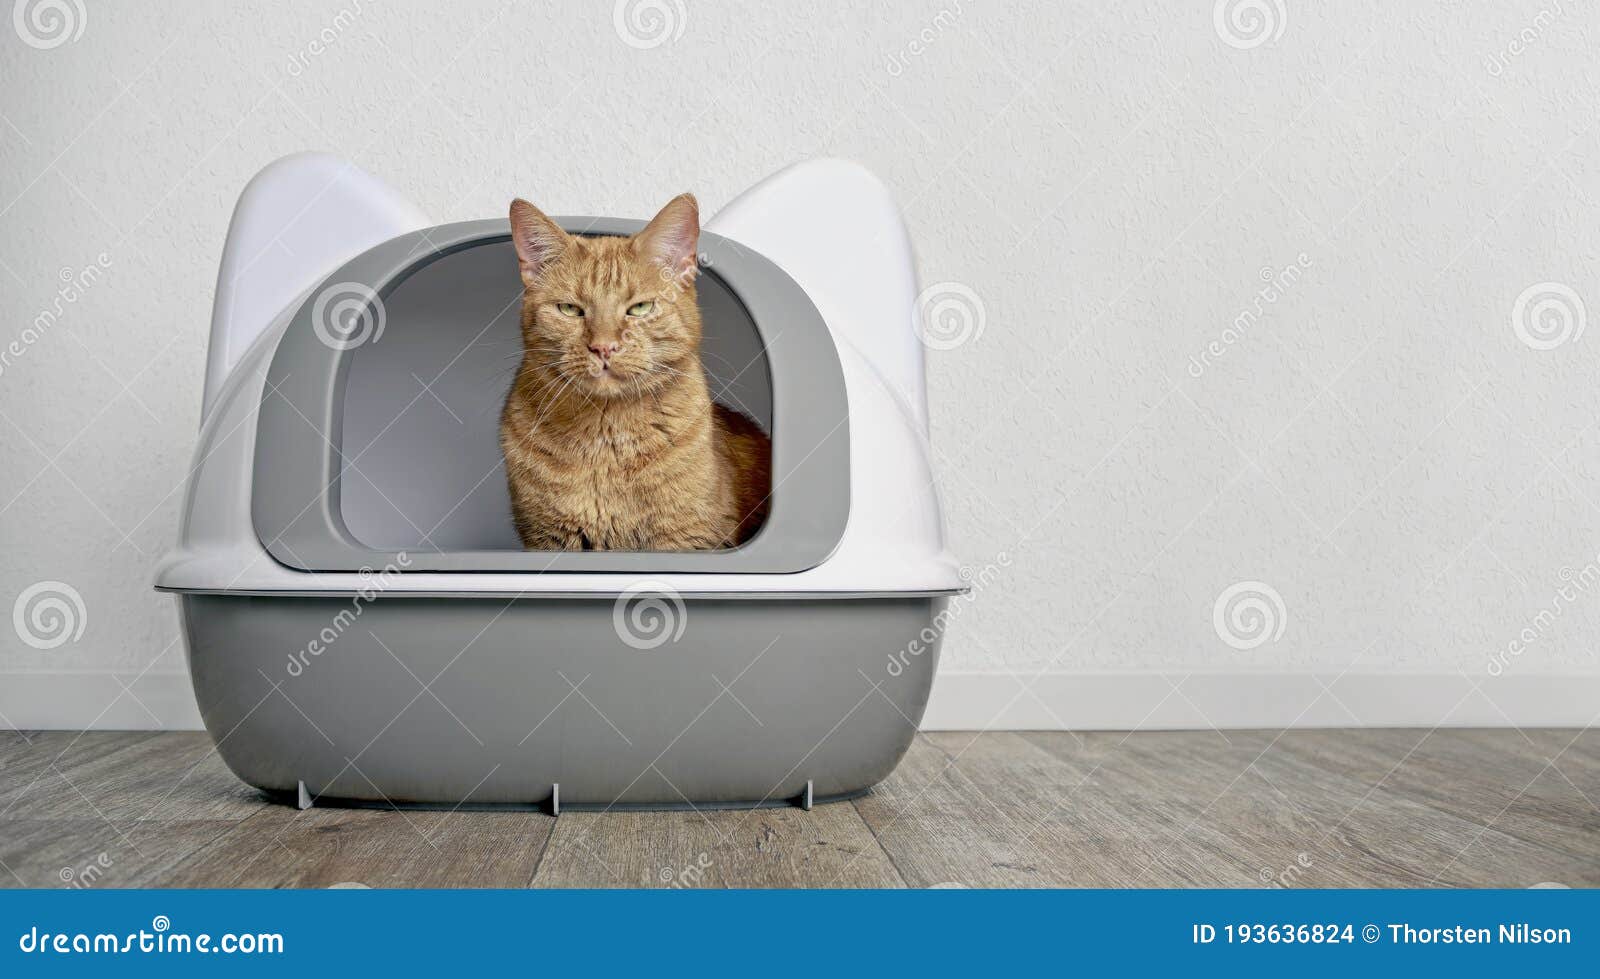 Cute Ginger Cat Sitting In A Litter Box And Look To The Camera. Stock